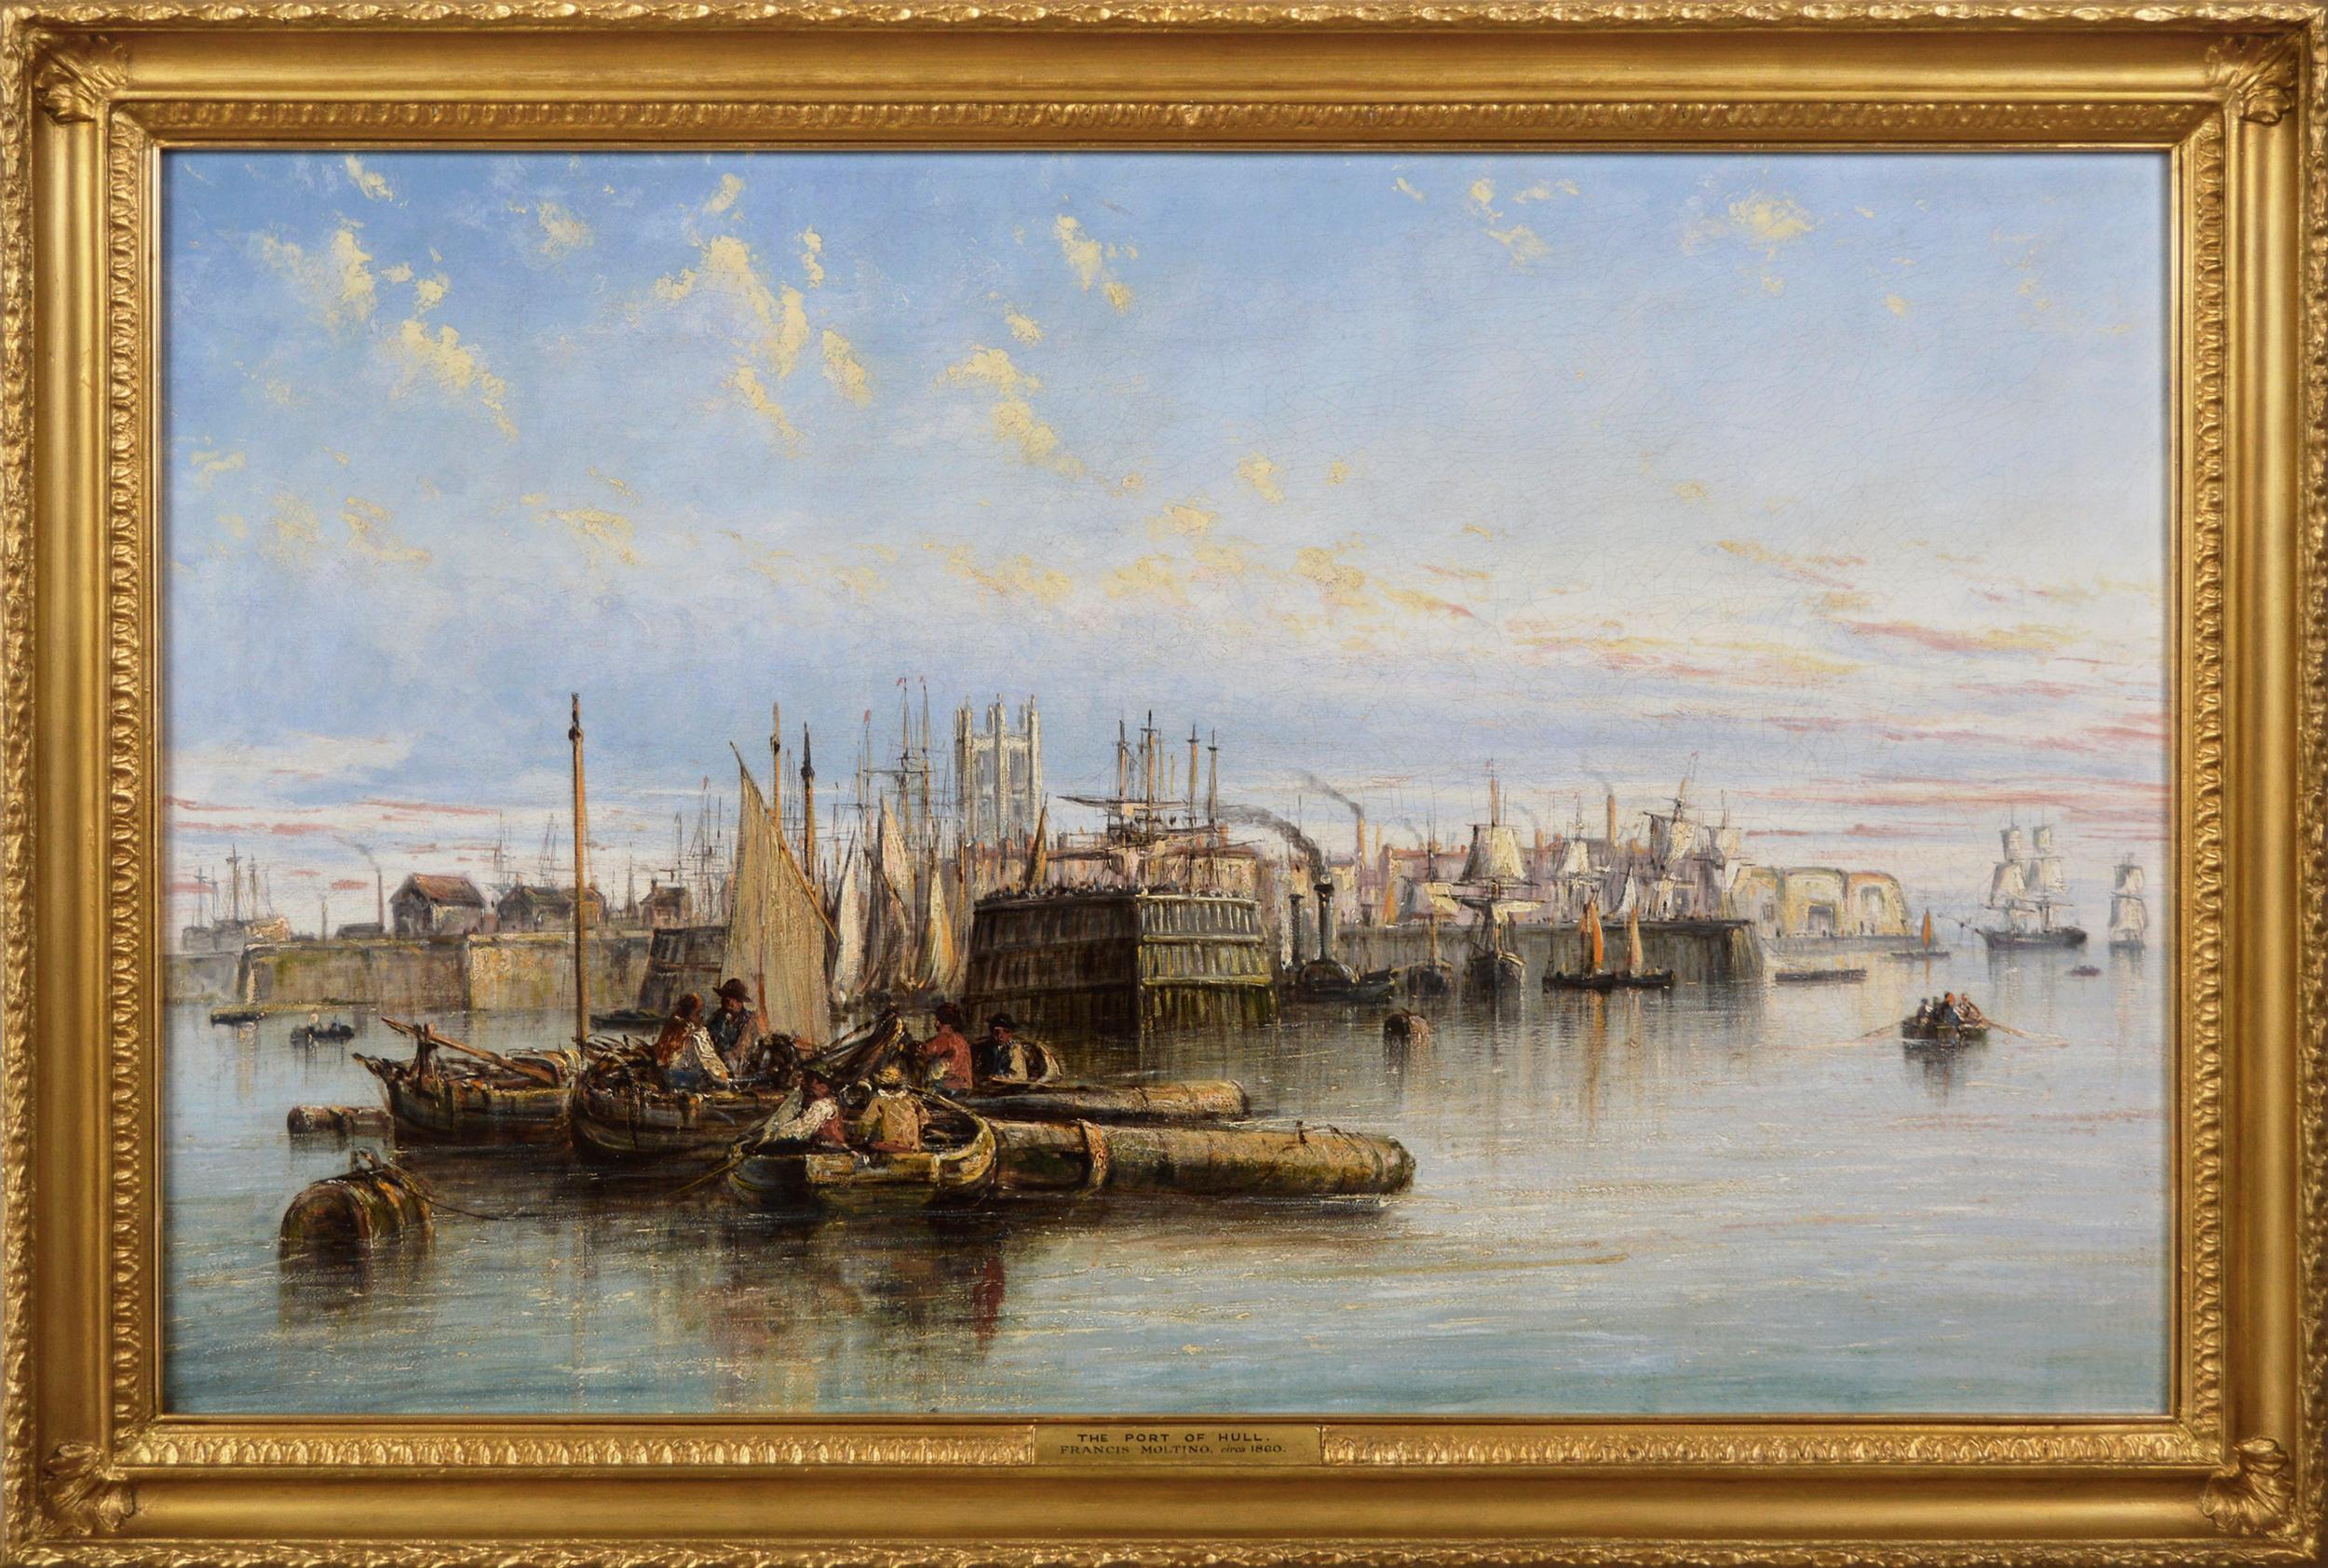 19th Century seascape oil painting of ships & boats at the port of Hull